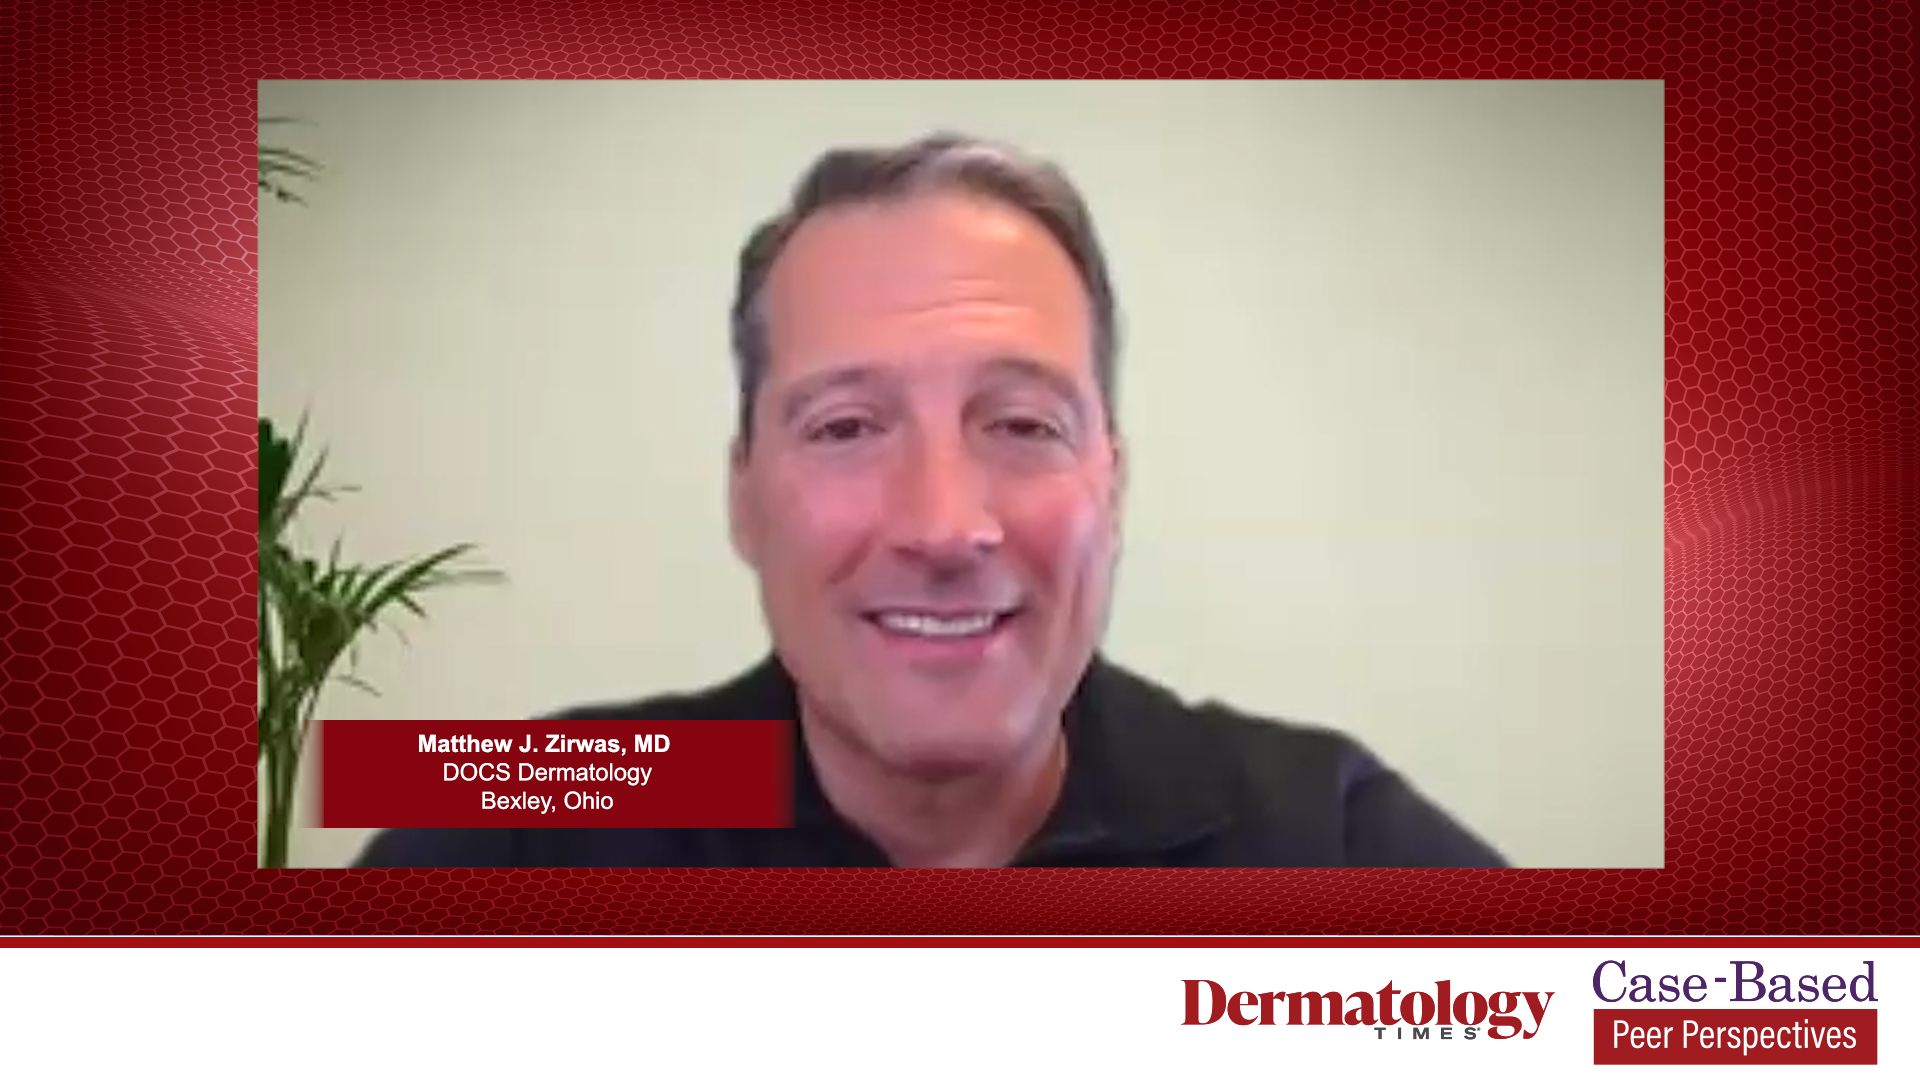 Video 2 - "Atopic Dermatitis and Contact Dermatitis: Navigating Intersecting Pathways and Optimal Management Strategies"